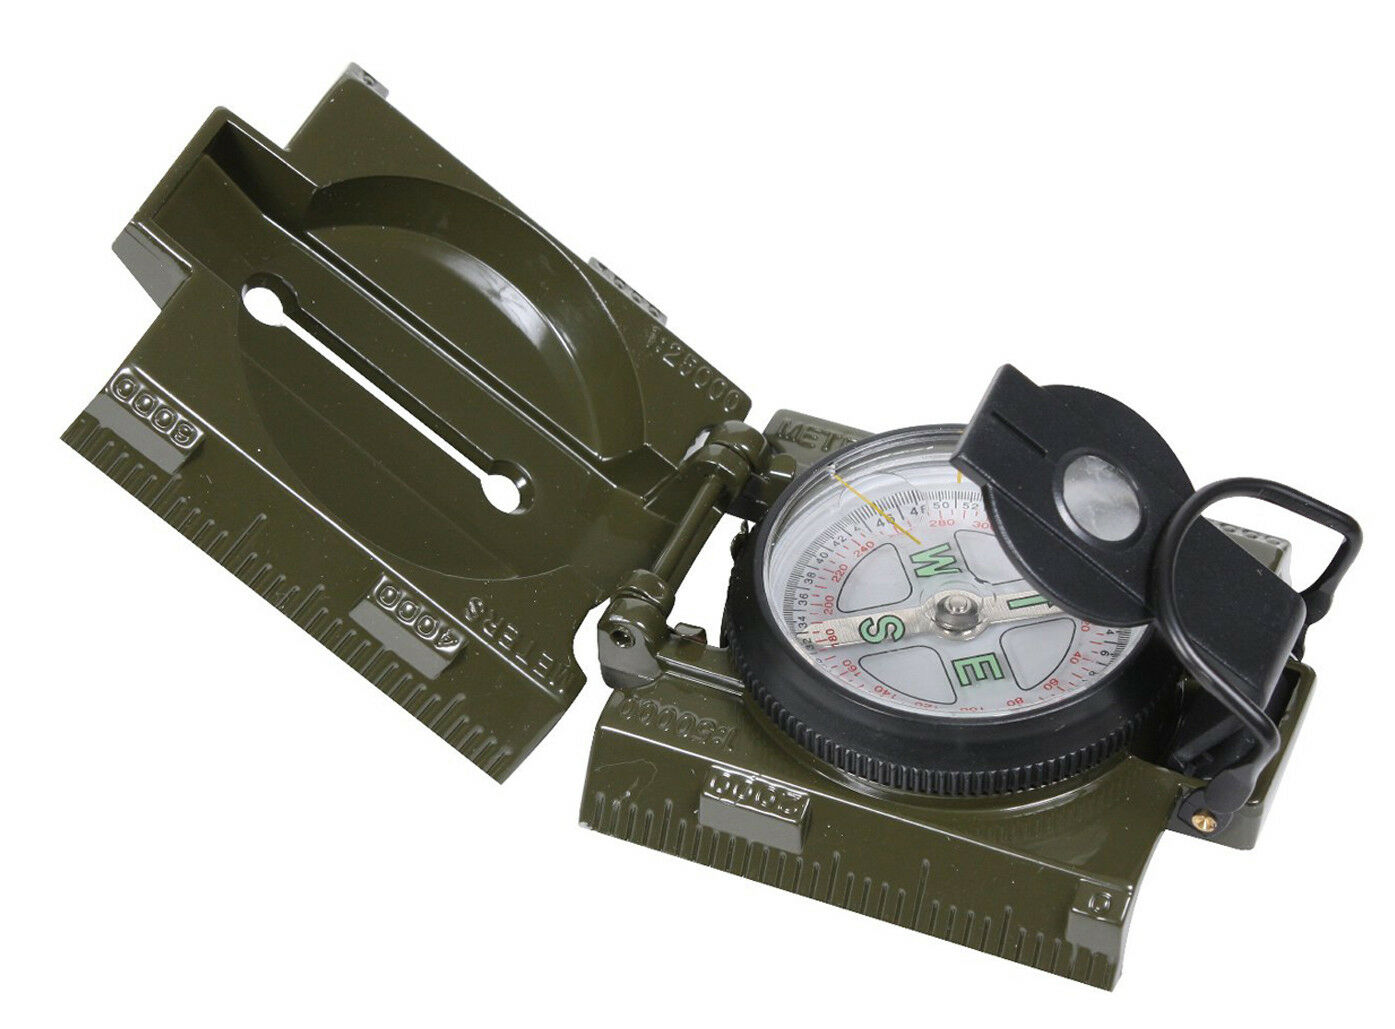 Rothco Military Marching Compass with LED Light